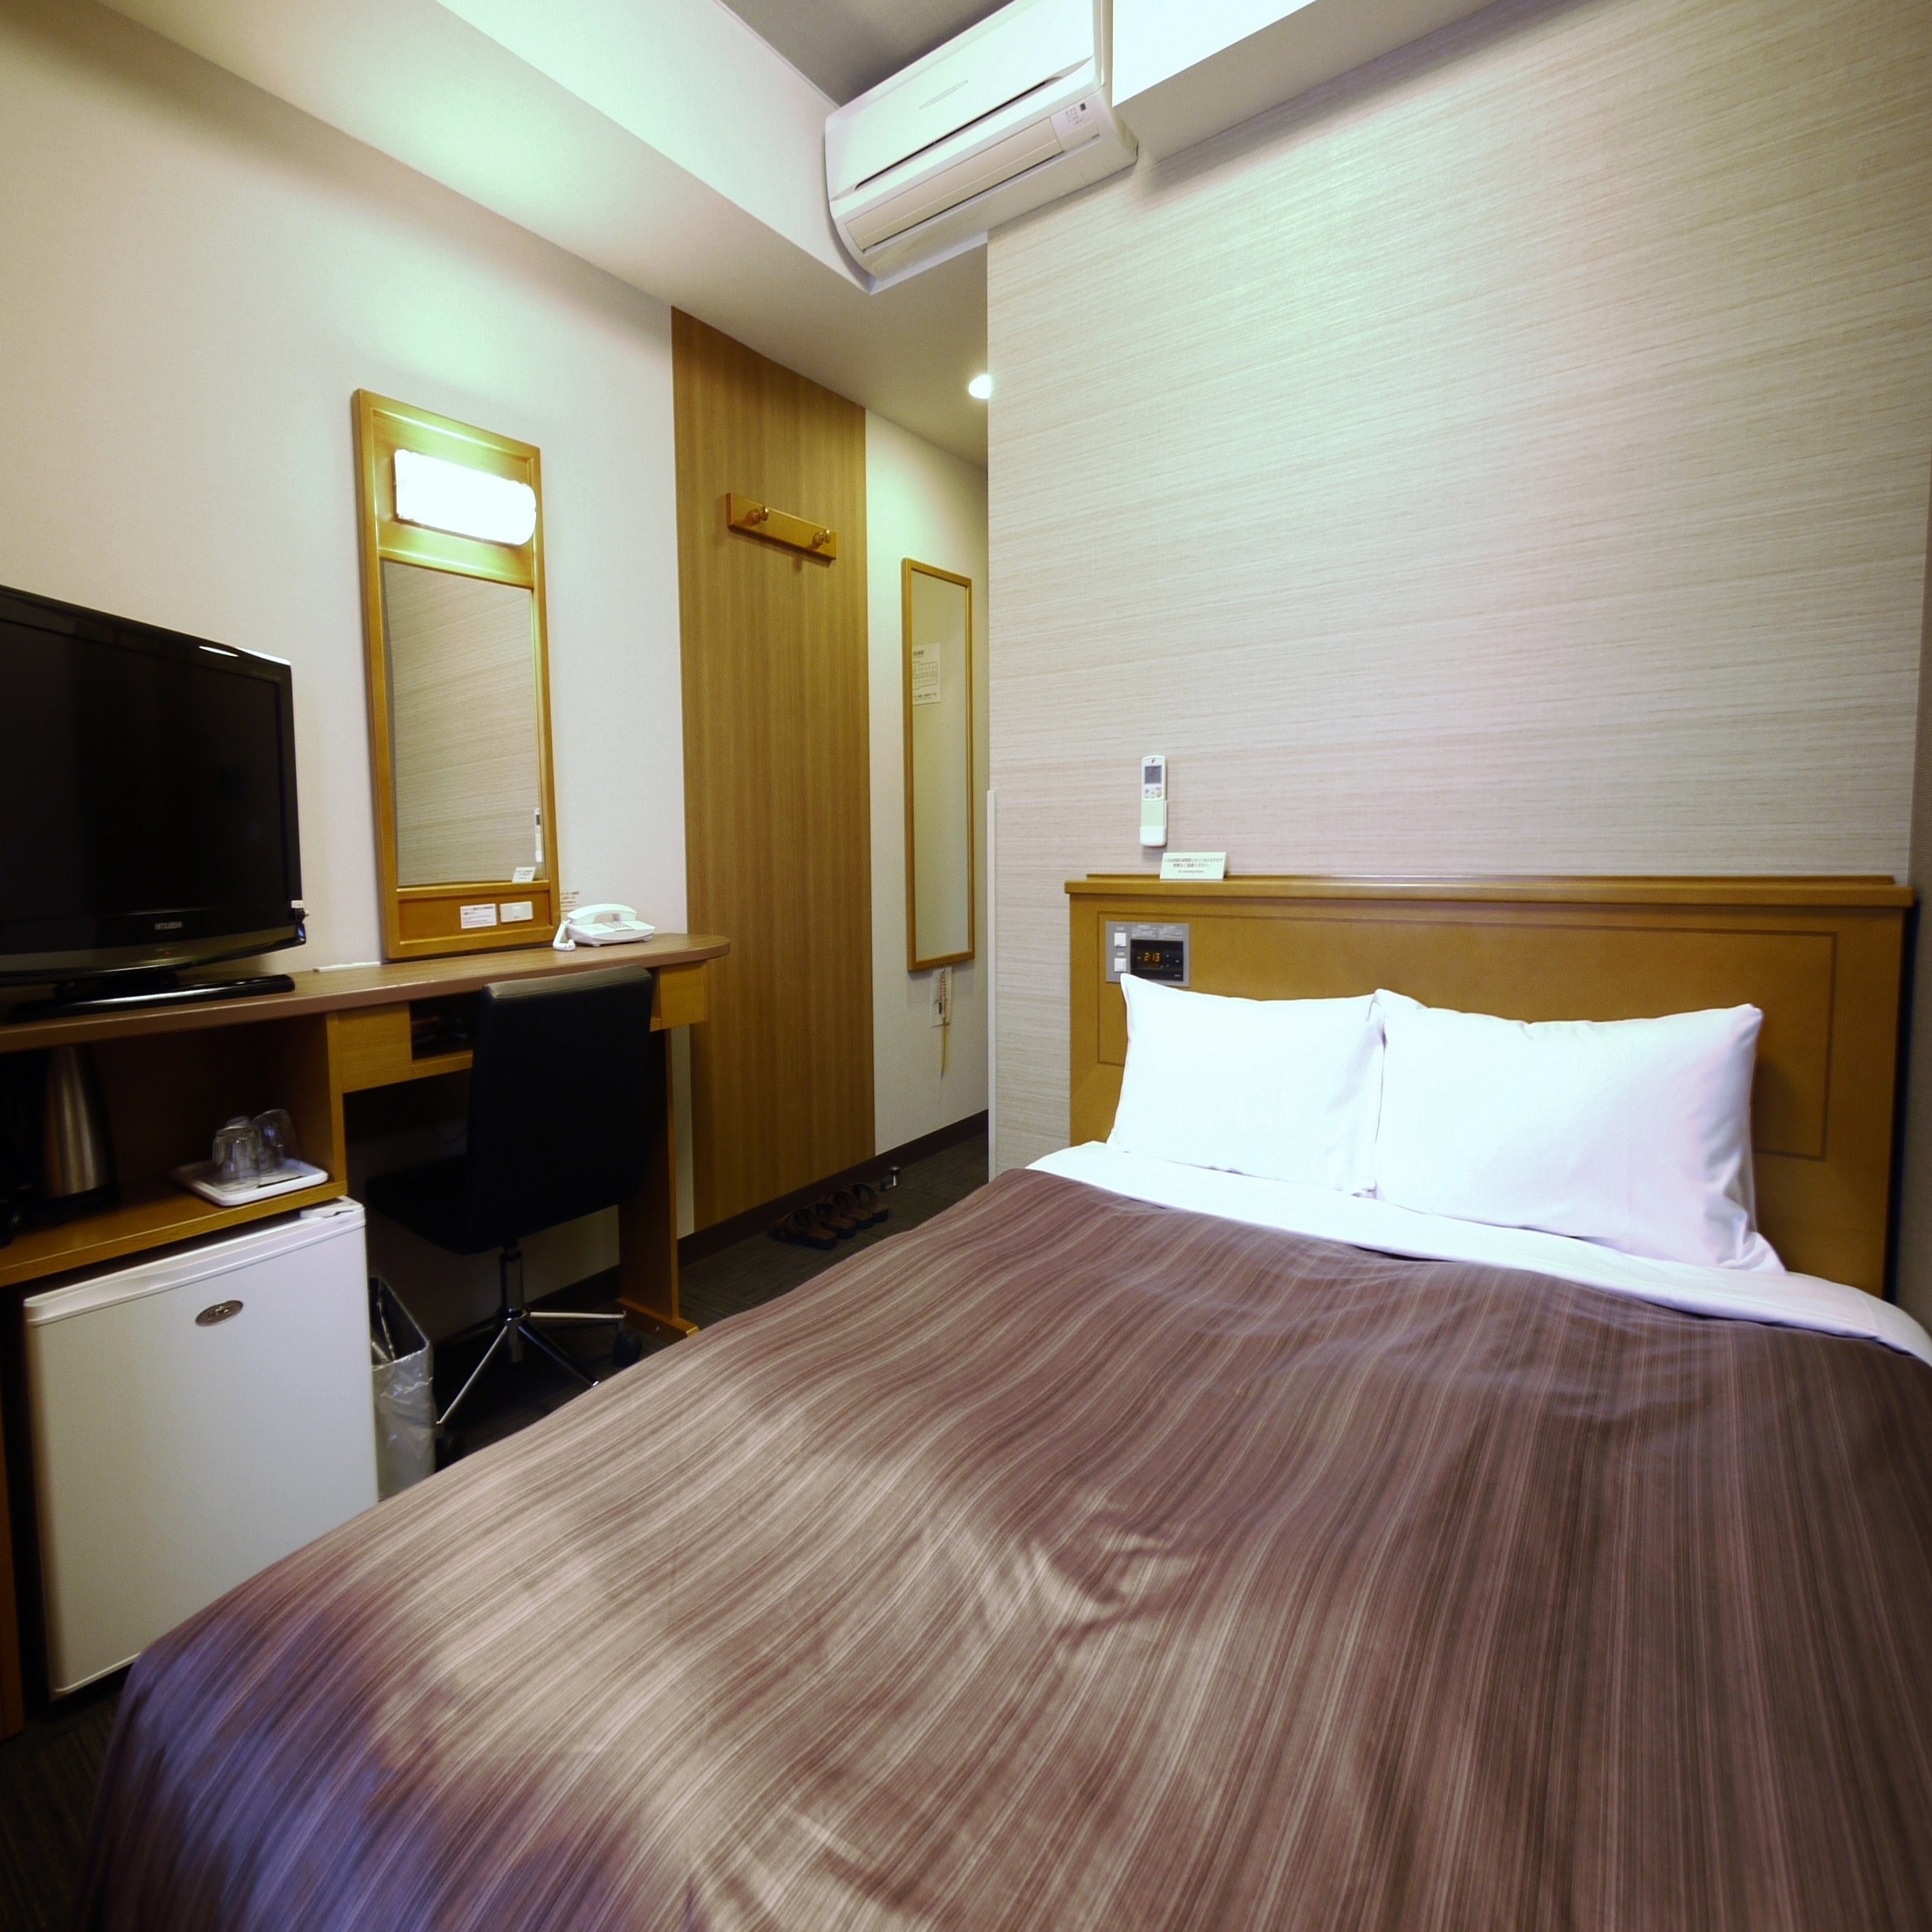 ■ Semi-double room ■ Ideal for couples and couples.